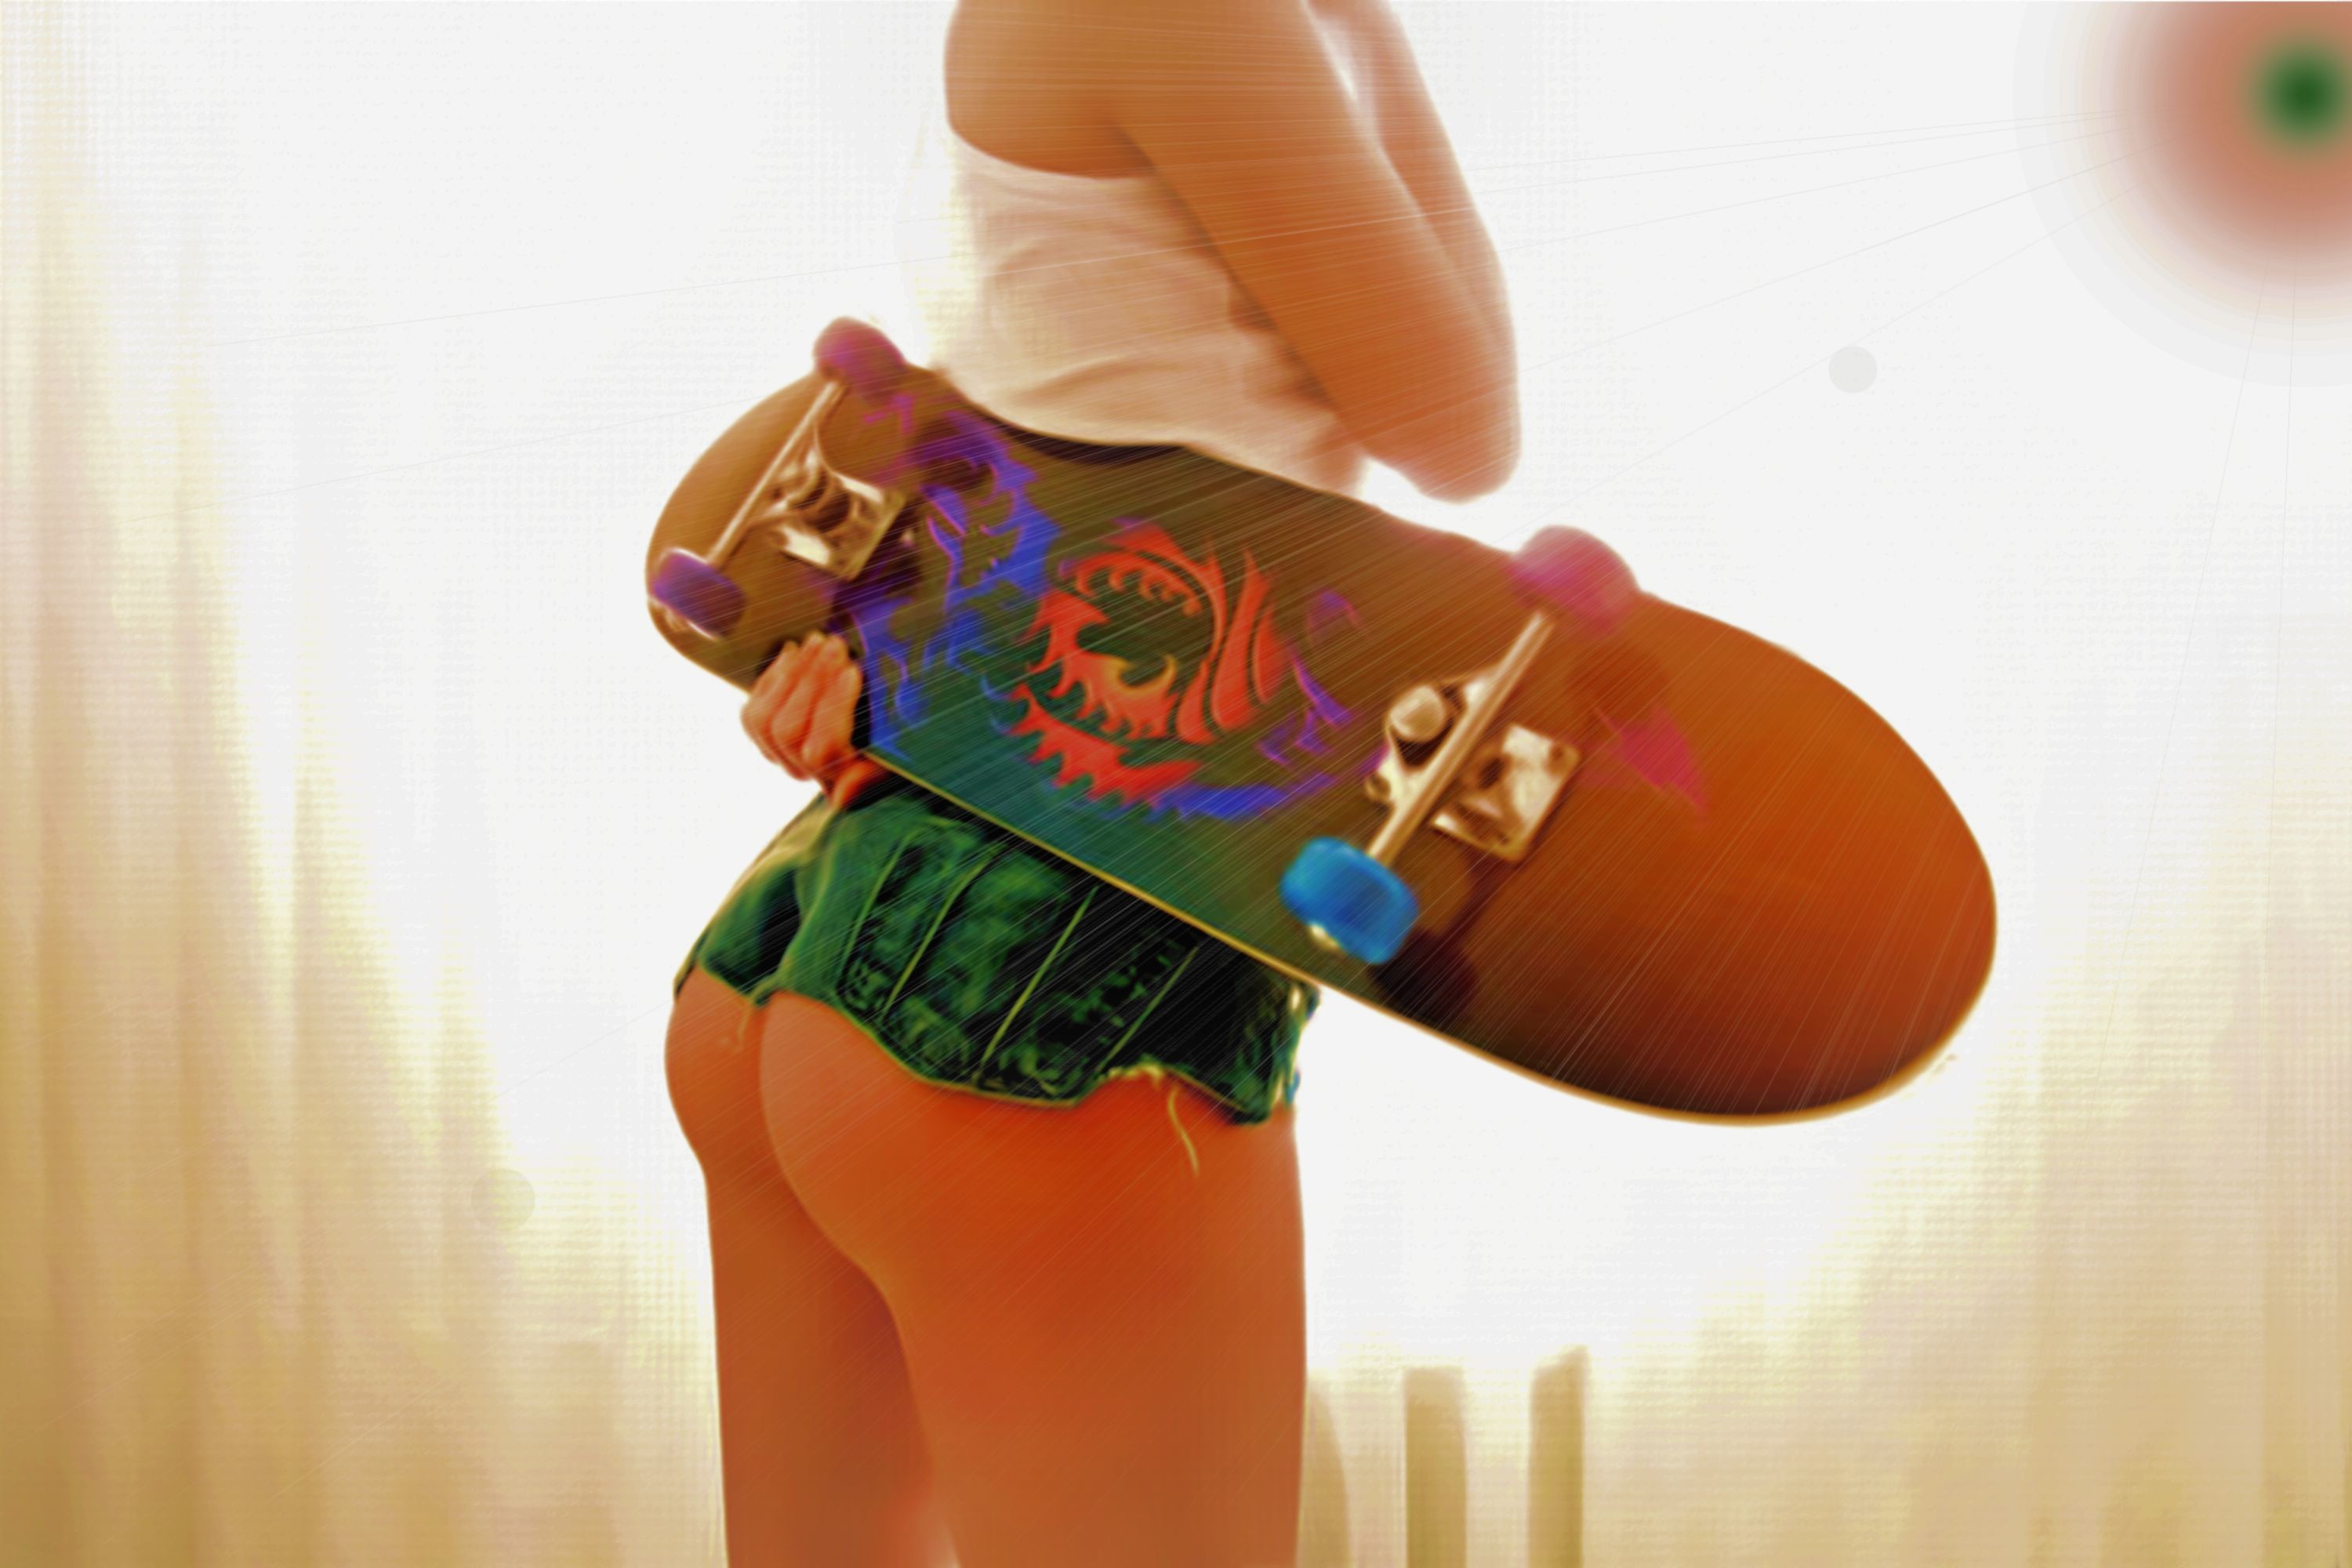 3000x2000 ... Skater Girl - by Slawa by montag451